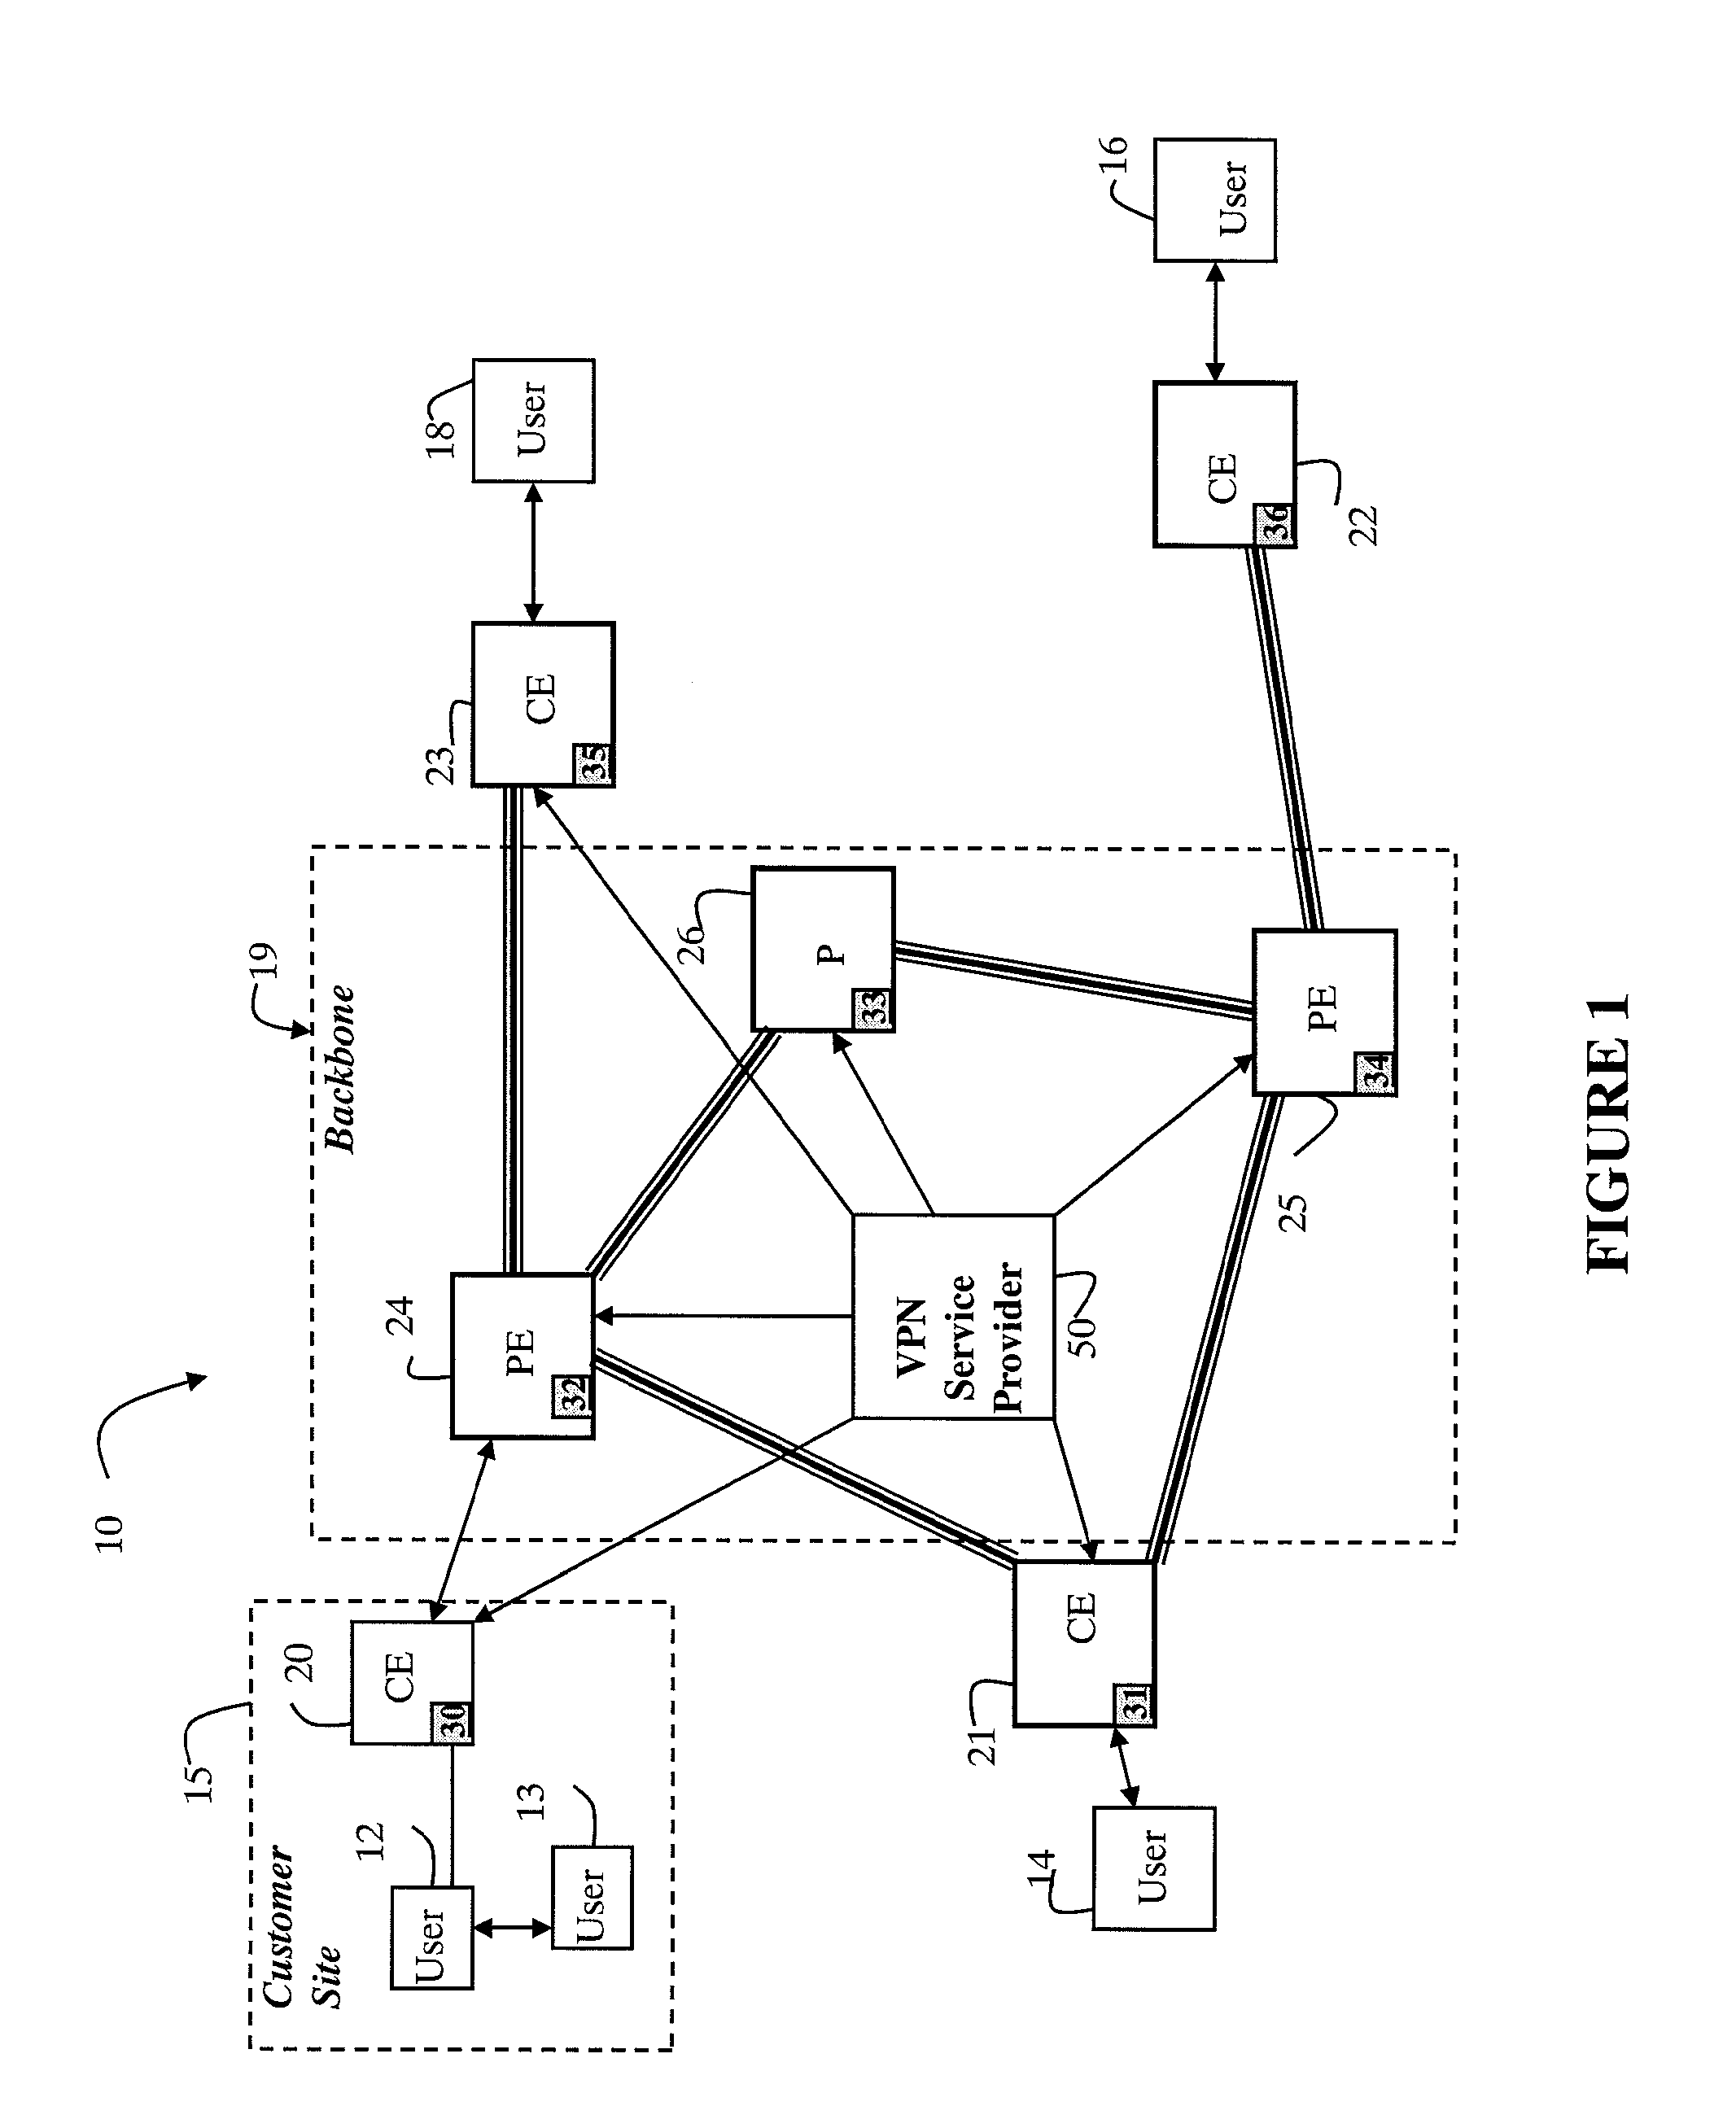 Method and Apparatus for Assigning and Allocating Network Resources to Packet-Based Virtual Private Networks